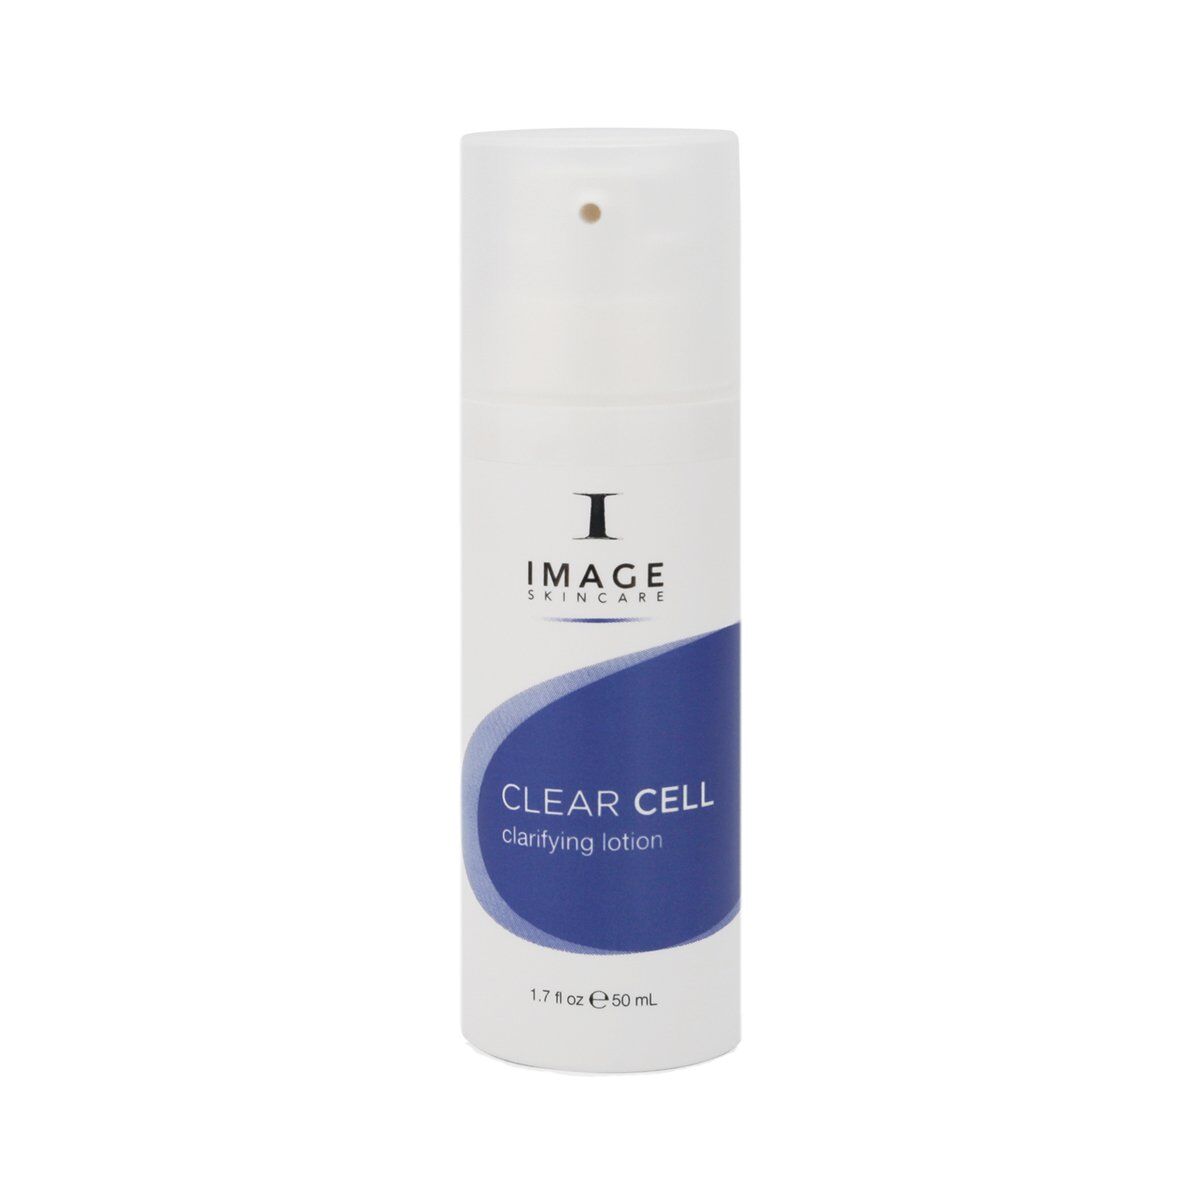 Image skincare - Clear Cell Clarifying Lotion